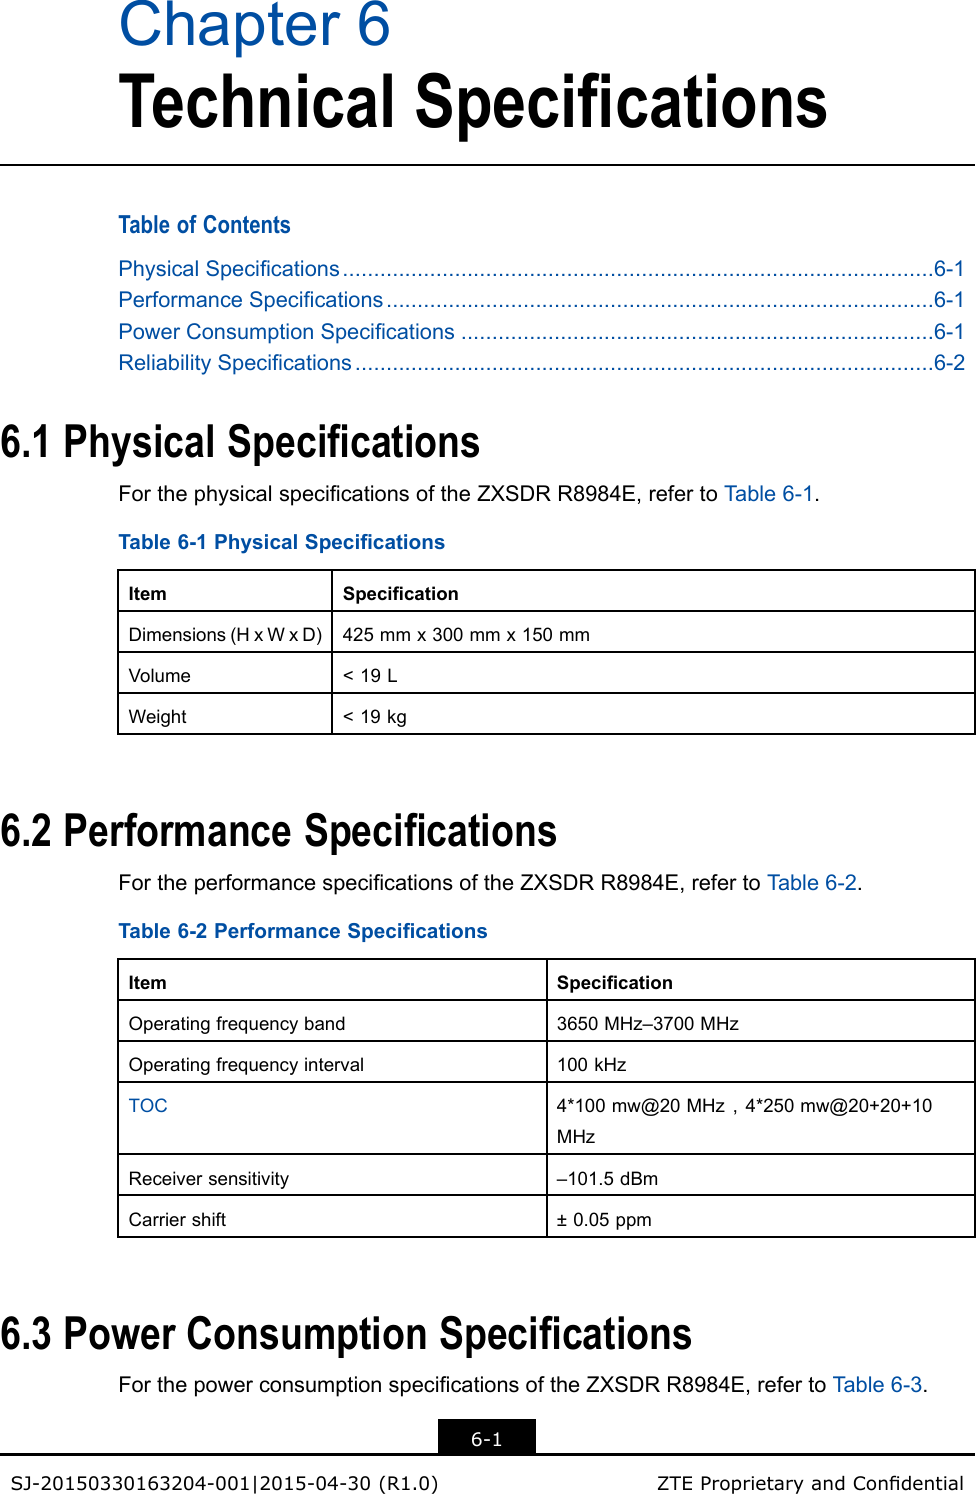 Chapter6TechnicalSpecicationsTableofContentsPhysicalSpecications...............................................................................................6-1PerformanceSpecications........................................................................................6-1PowerConsumptionSpecications............................................................................6-1ReliabilitySpecications.............................................................................................6-26.1PhysicalSpecicationsForthephysicalspecicationsoftheZXSDRR8984E,refertoT able6-1.Table6-1PhysicalSpecicationsItemSpecicationDimensions(HxWxD)425mmx300mmx150mmVolume&lt;19LWeight&lt;19kg6.2PerformanceSpecicationsFortheperformancespecicationsoftheZXSDRR8984E,refertoTable6-2.Table6-2PerformanceSpecicationsItemSpecicationOperatingfrequencyband3650MHz–3700MHzOperatingfrequencyinterval100kHzTOC4*100mw@20MHz，4*250mw@20+20+10MHzReceiversensitivity–101.5dBmCarriershift±0.05ppm6.3PowerConsumptionSpecicationsForthepowerconsumptionspecicationsoftheZXSDRR8984E,refertoT able6-3.6-1SJ-20150330163204-001|2015-04-30(R1.0)ZTEProprietaryandCondential